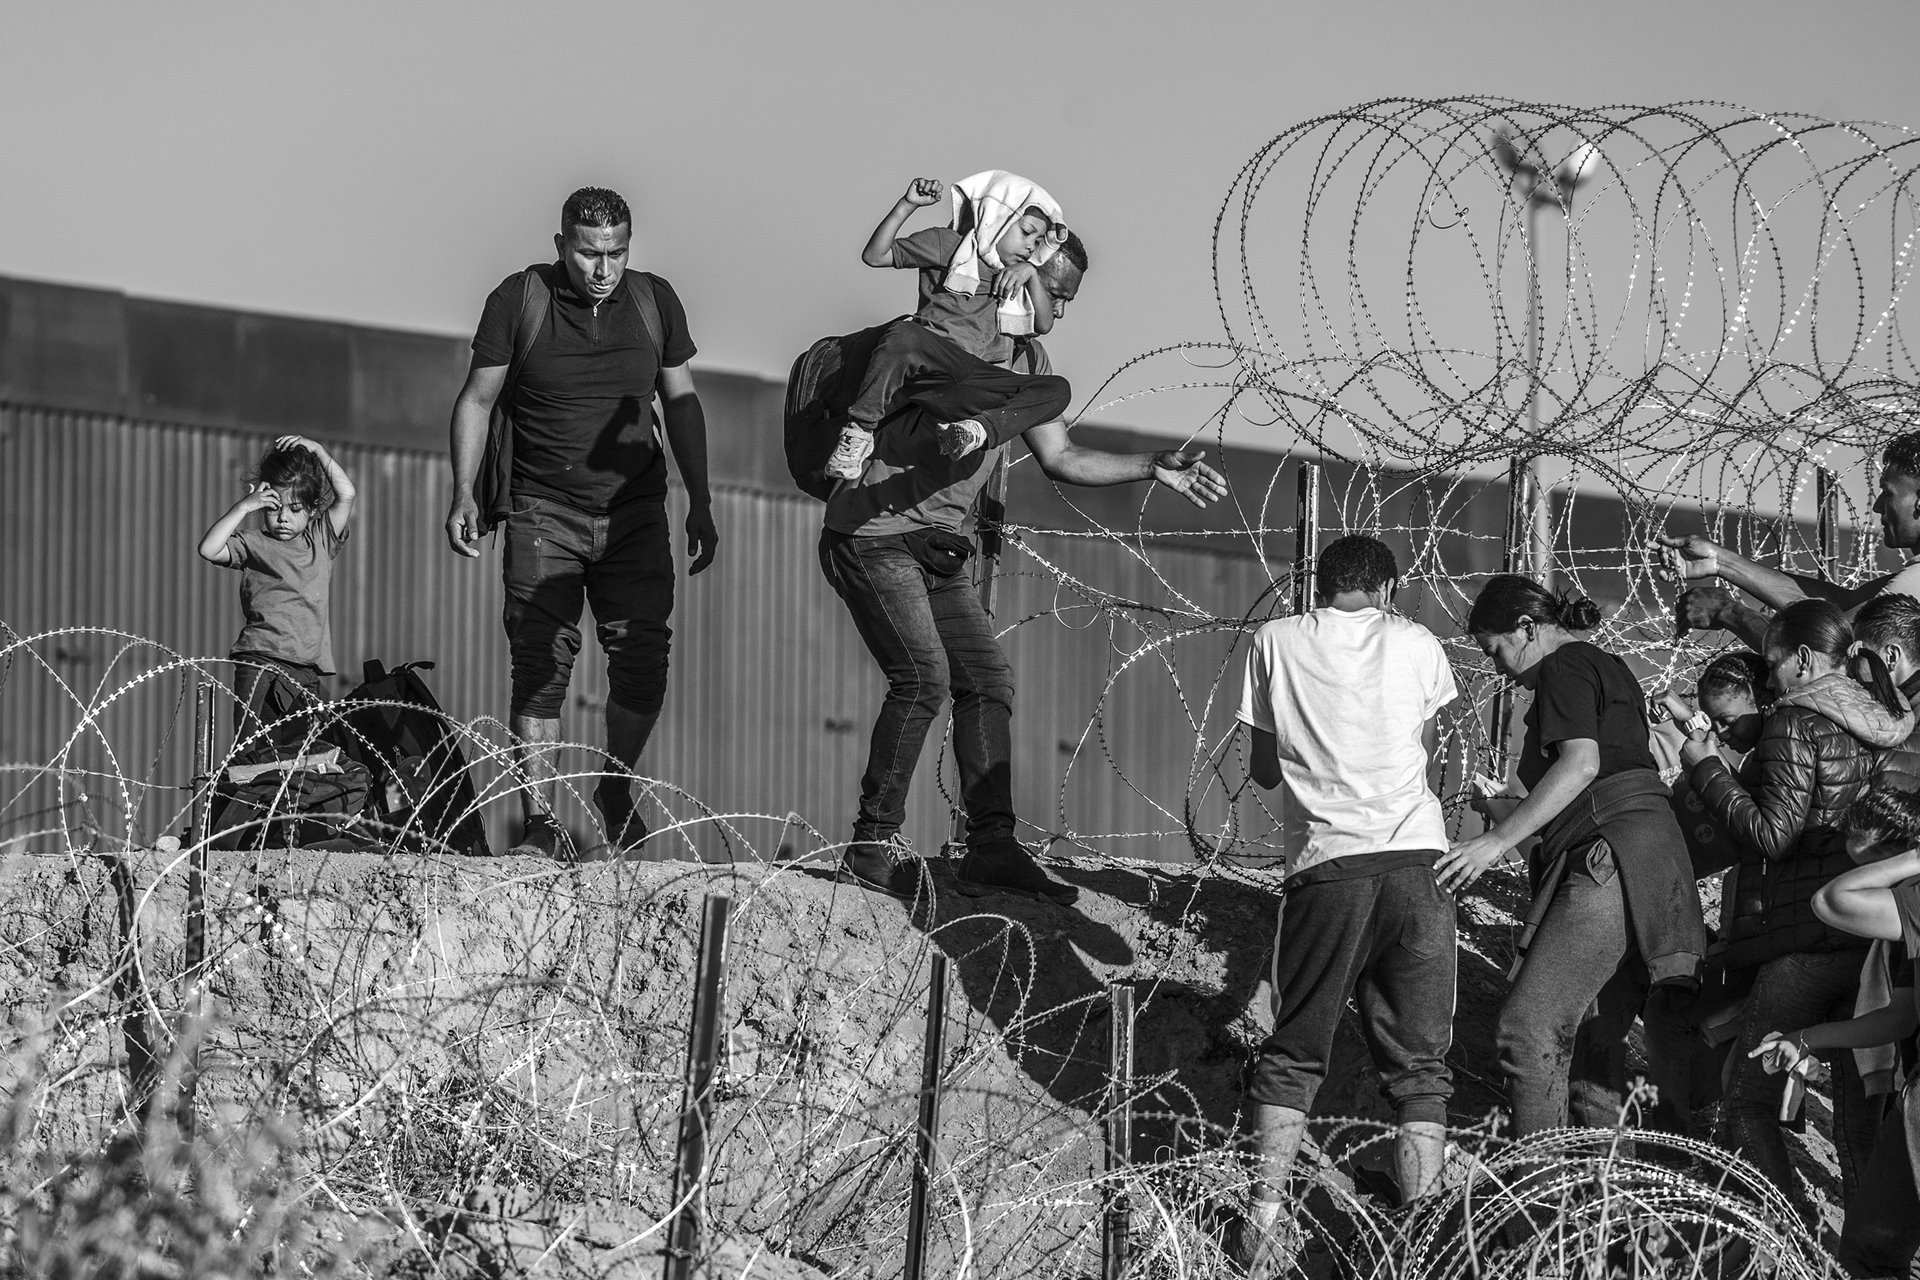 Migrants and asylum seekers attempt to cross a section of barbed wire set up by the Texas National Guard in Ciudad Juárez, Mexico.